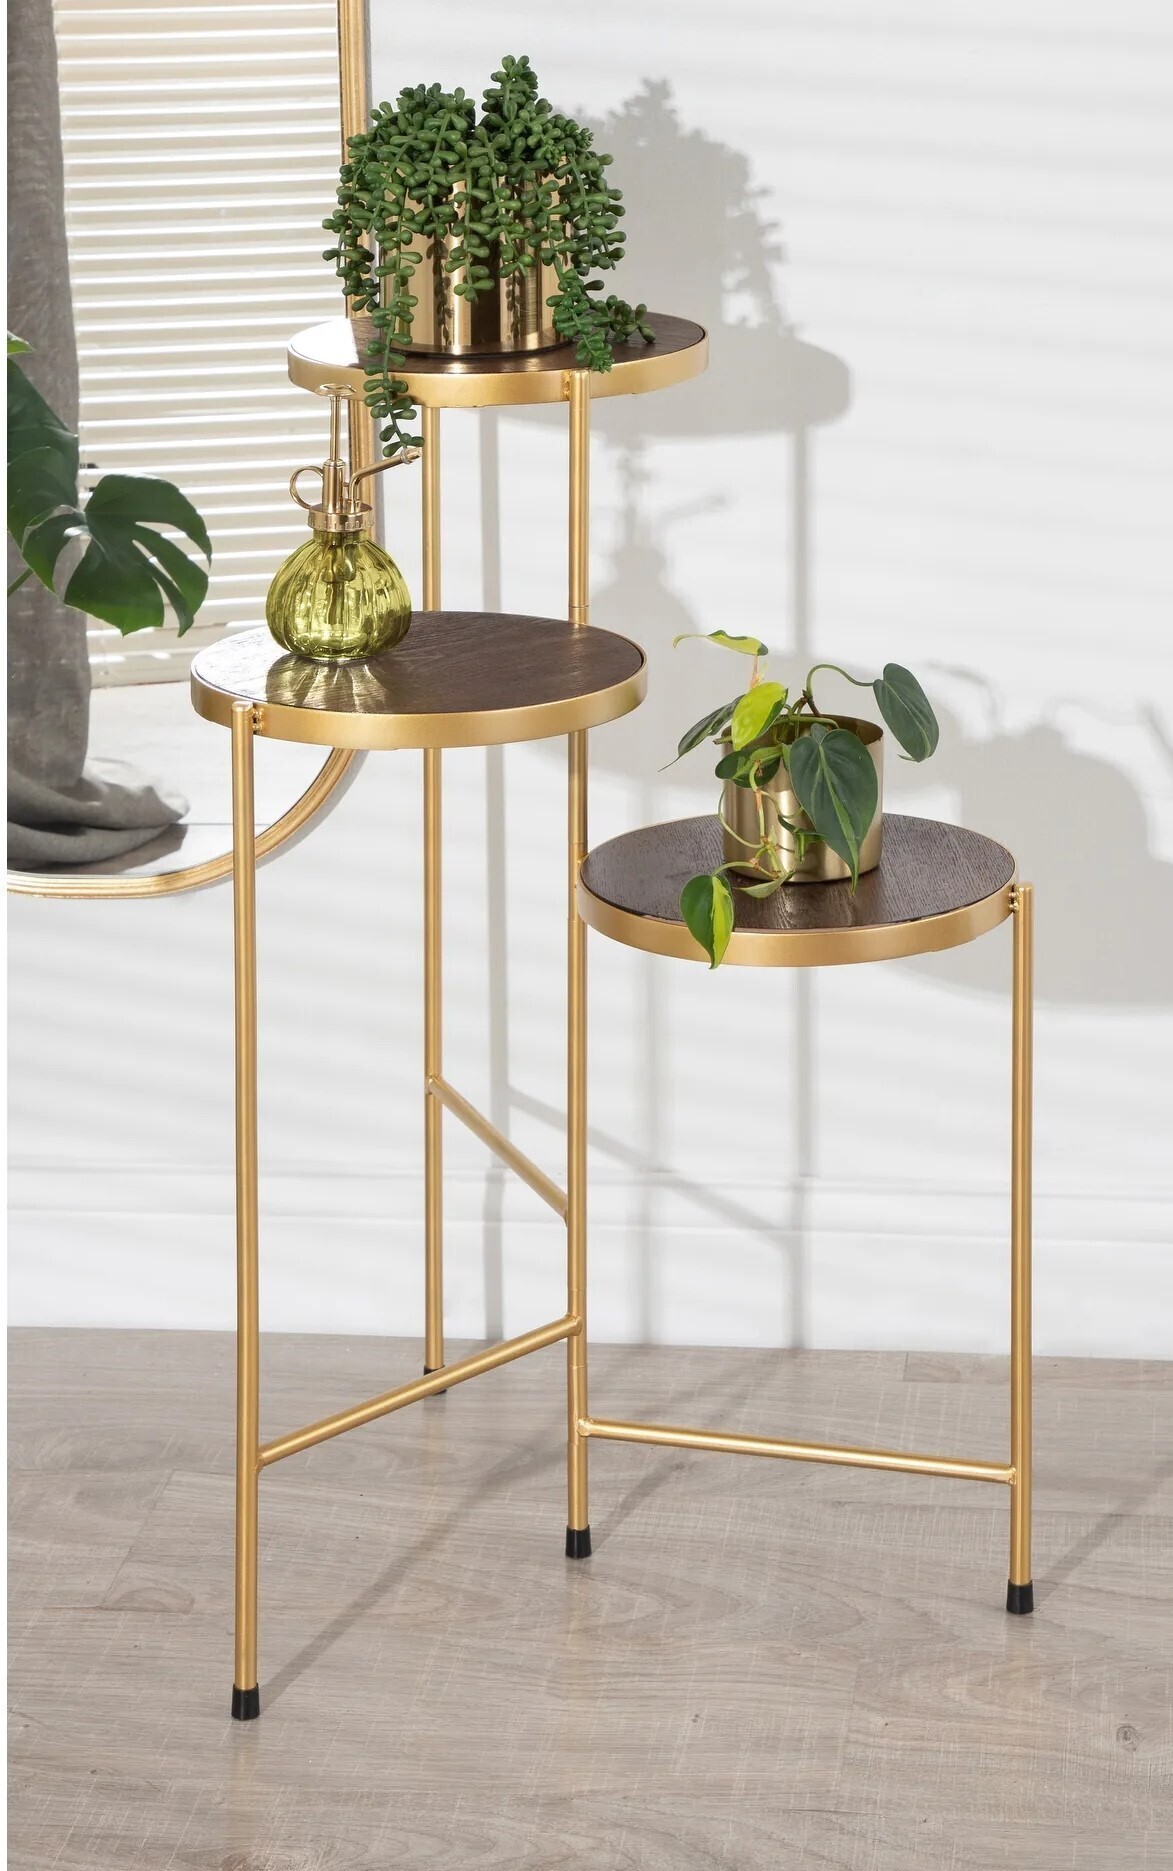 Connected Tri level Plant Table Stands